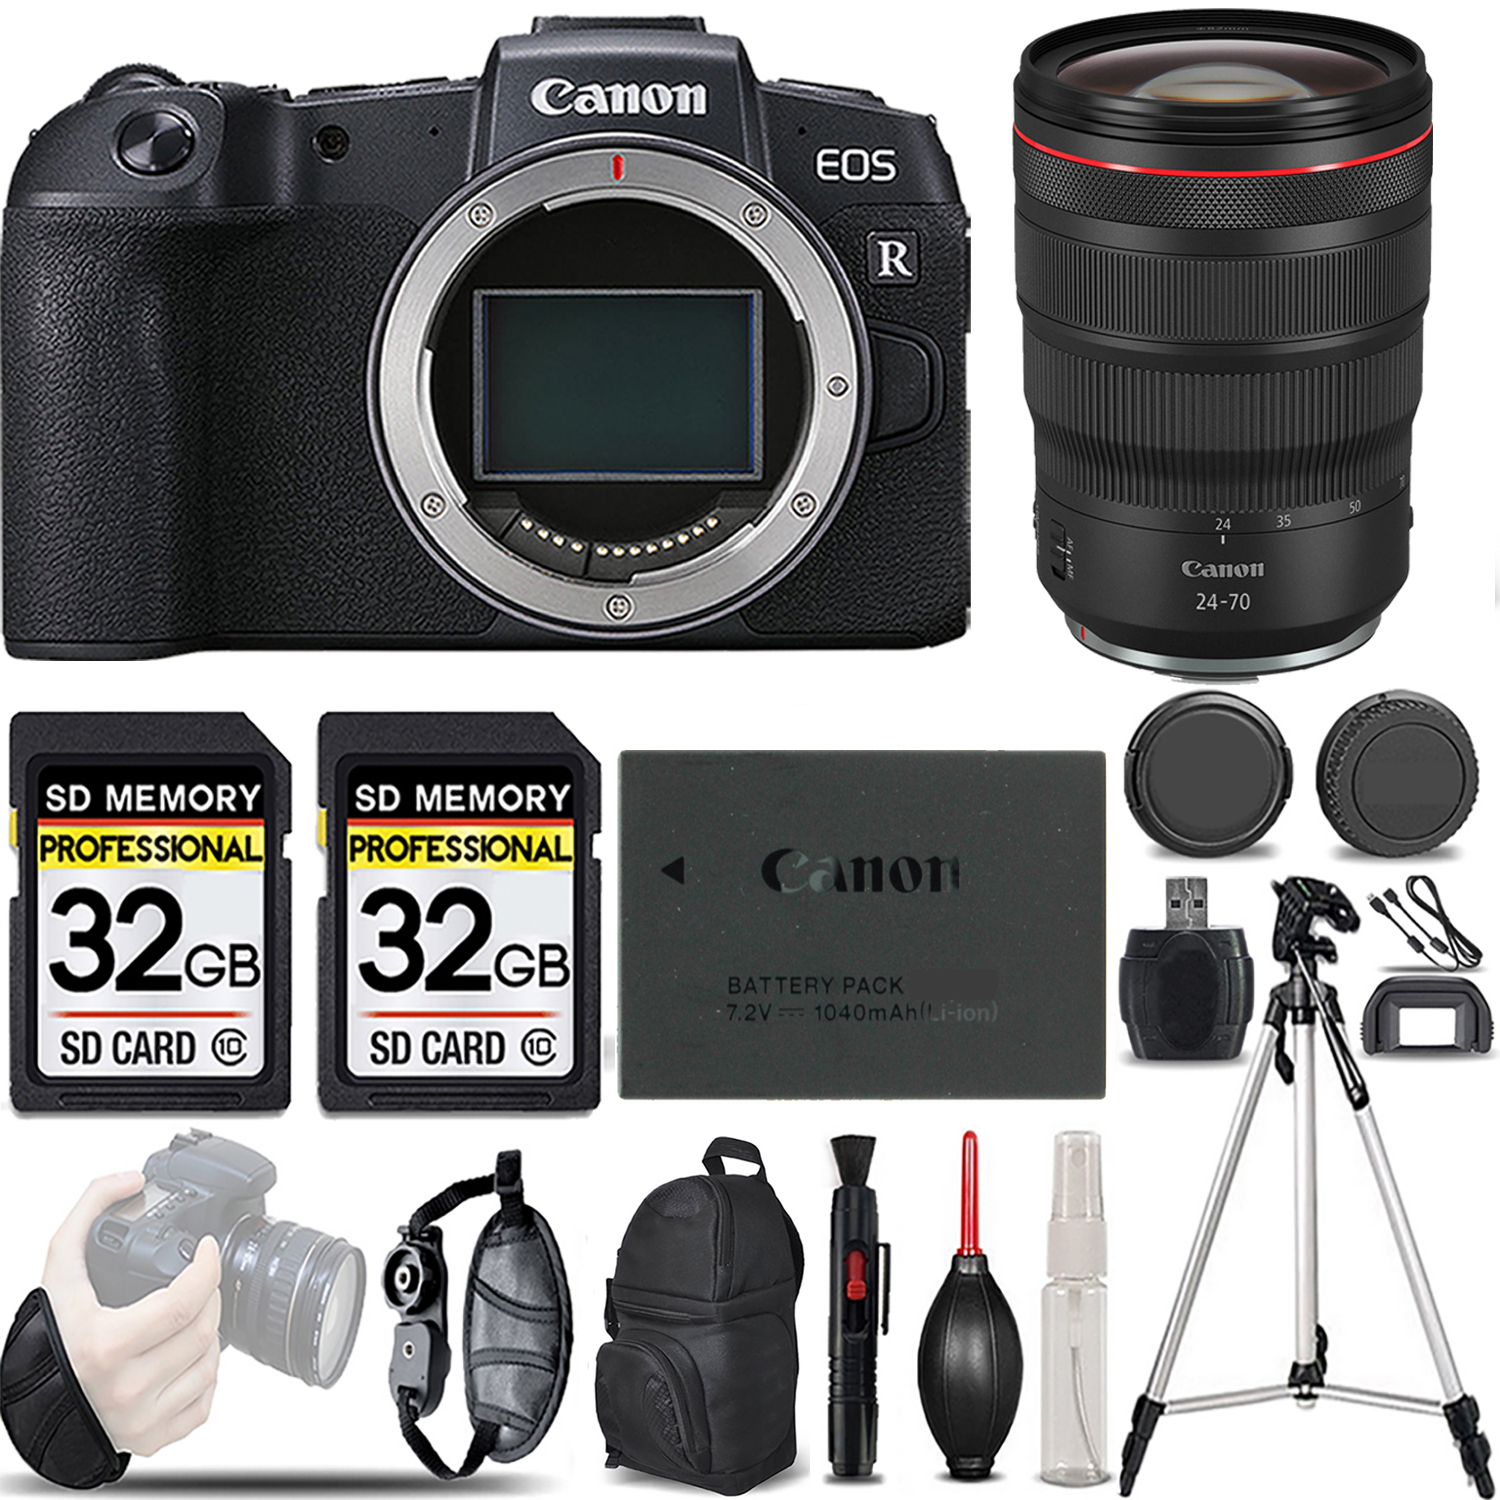 EOS RP Mirrorless Camera + 24-70mm f/2.8 L IS USM Lens - LOADED KIT *FREE SHIPPING*